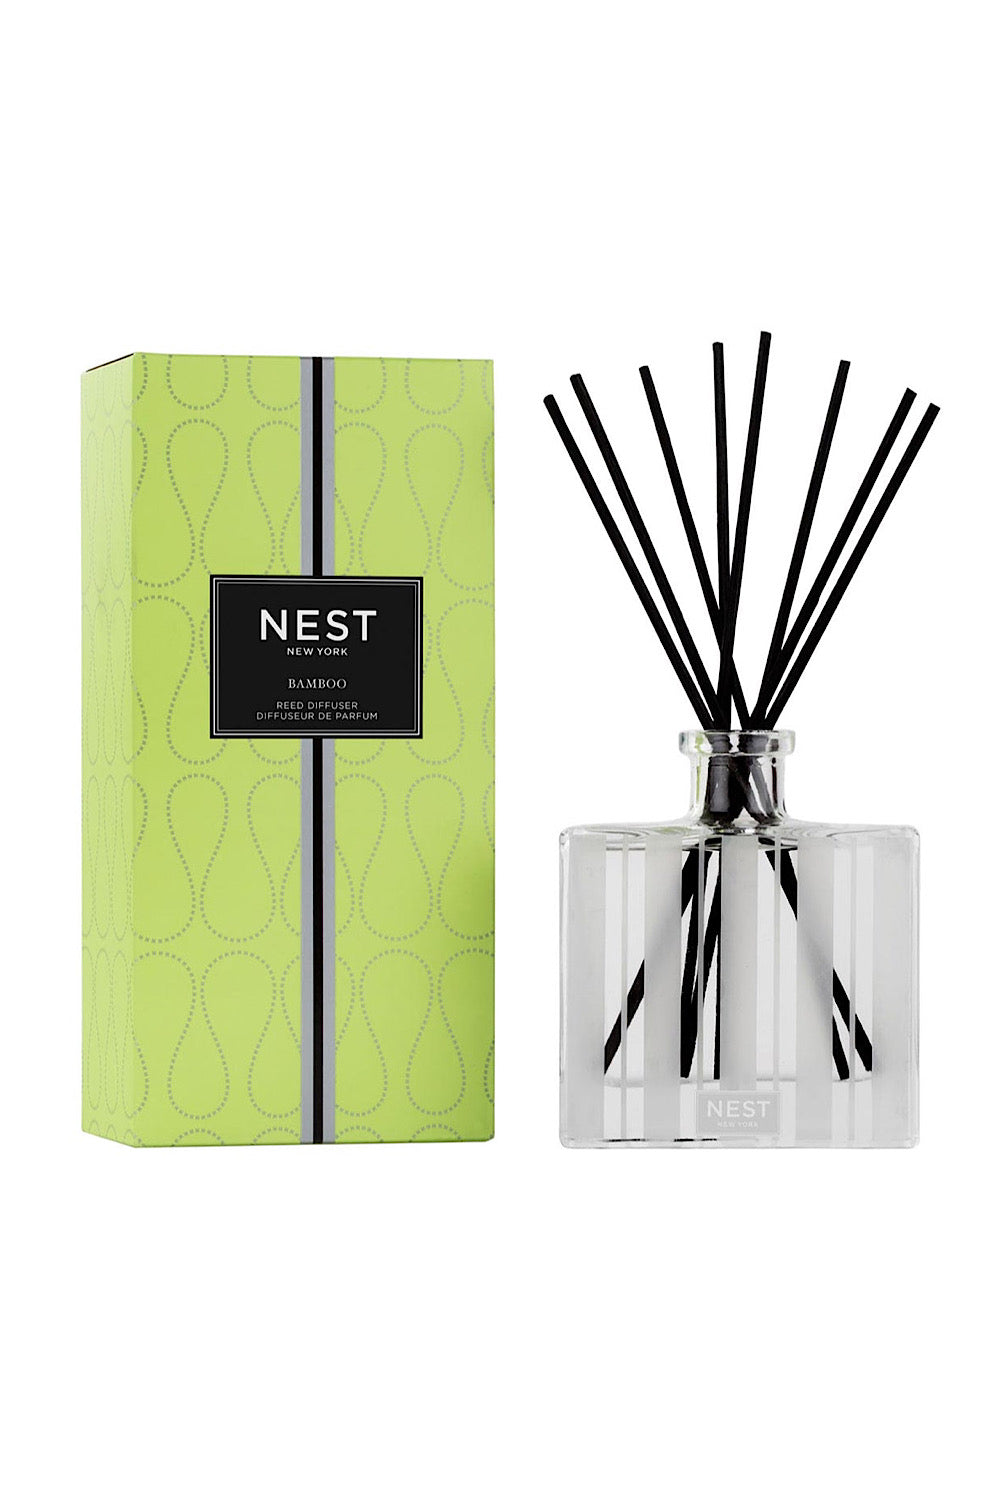 NEST BAMBOO REED DIFFUSER